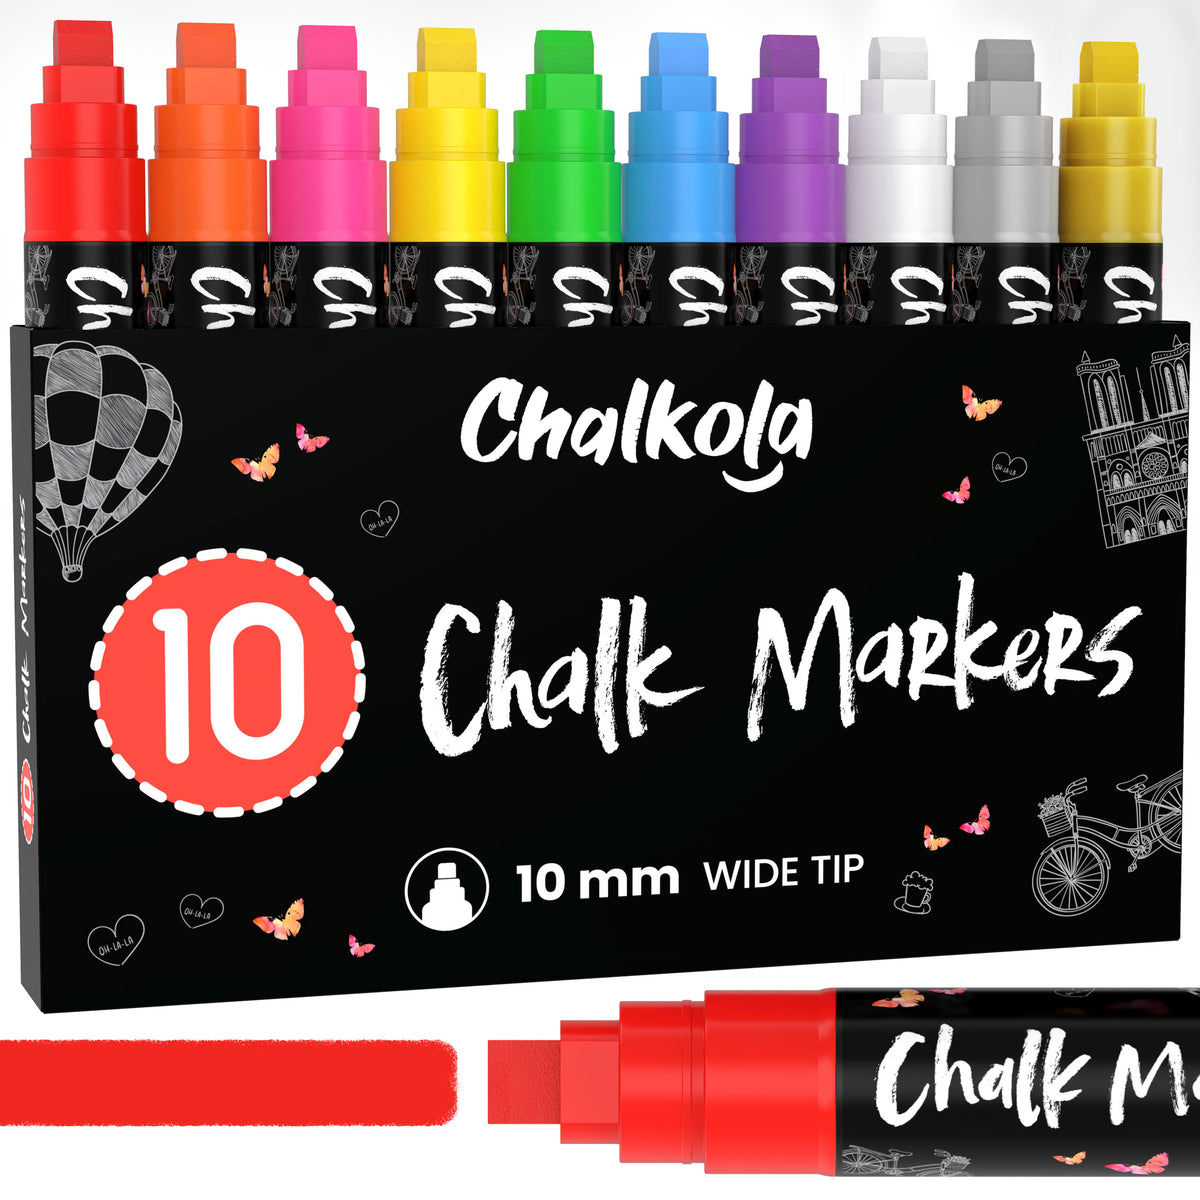 XMMSWDLA Bold Chalk Markers - Dry Erase Marker Pens - Liquid Chalk Markers  For Chalkboards, Signs, Windows, Blackboard, Glass, Mirrors - Chalkboard  Markers With Reversible Tip 